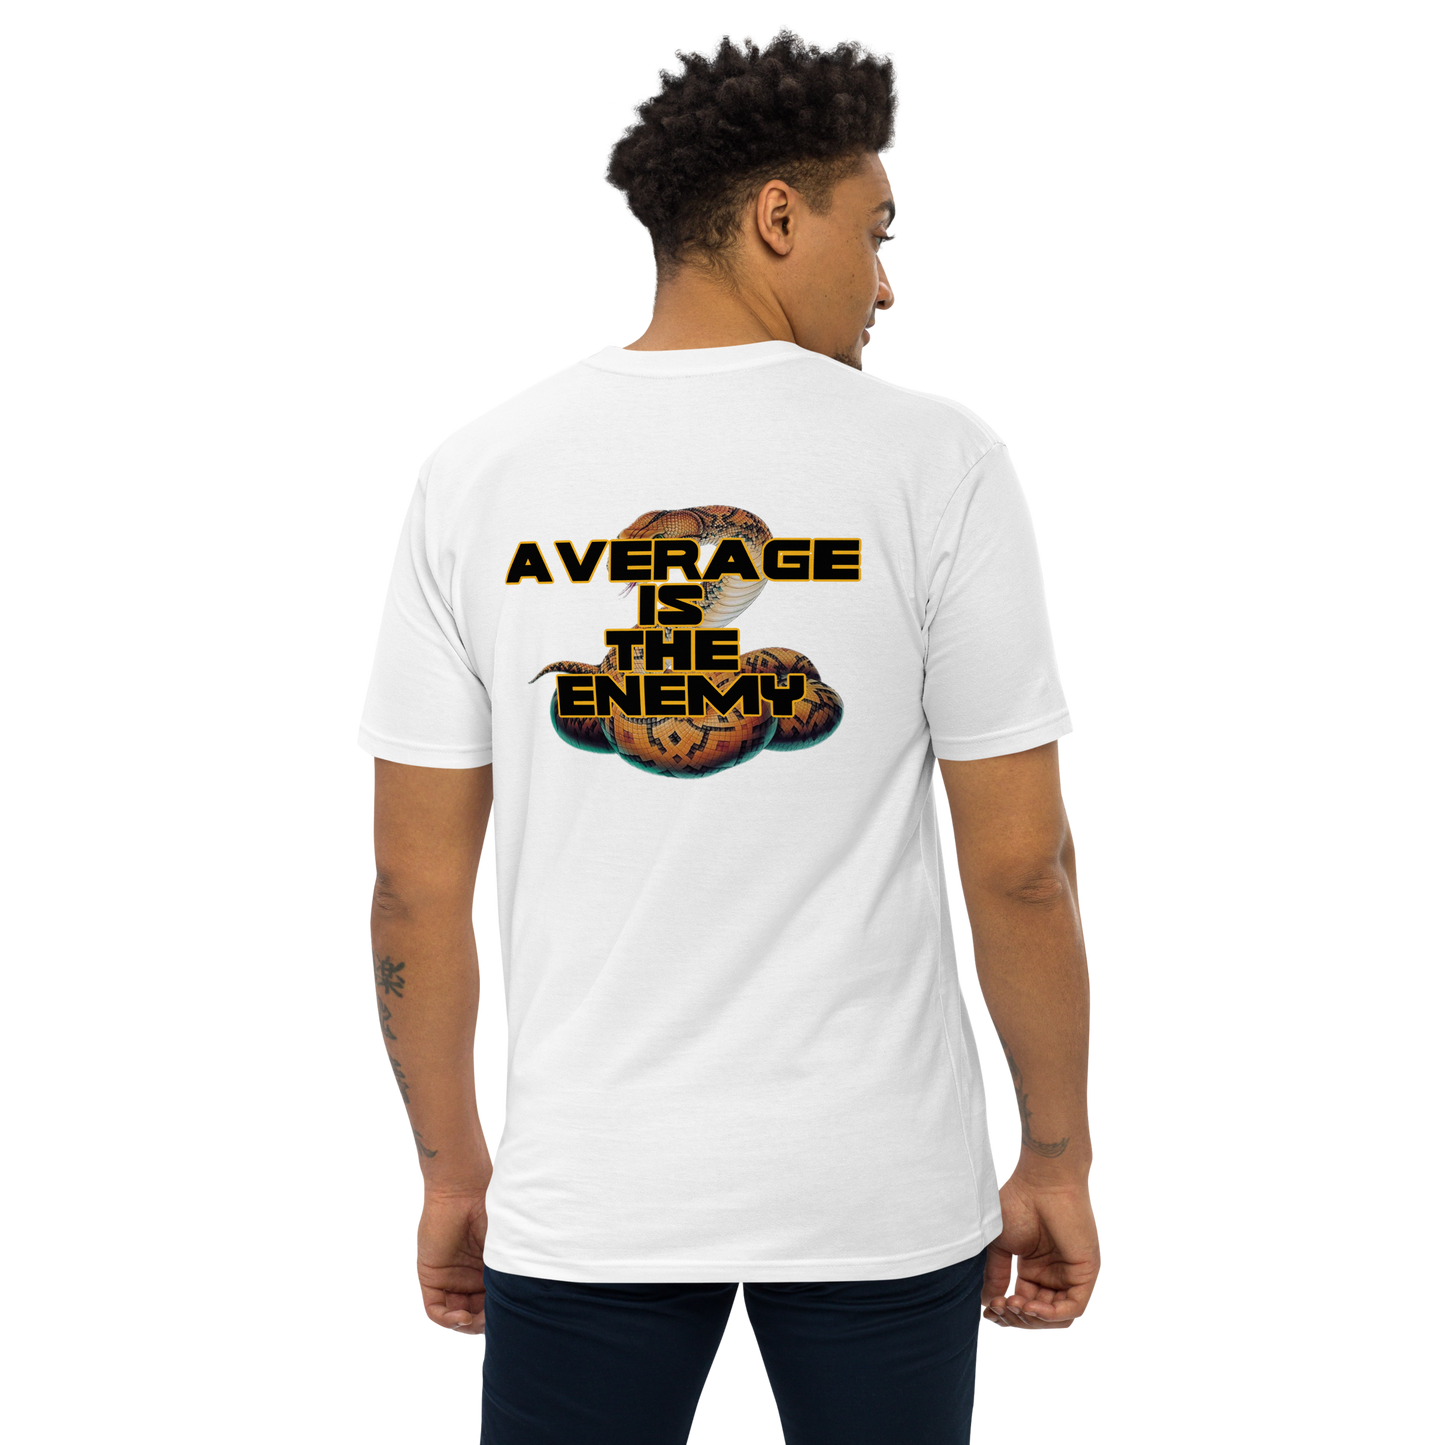 AVERAGE IS THE ENEMY SHIRT